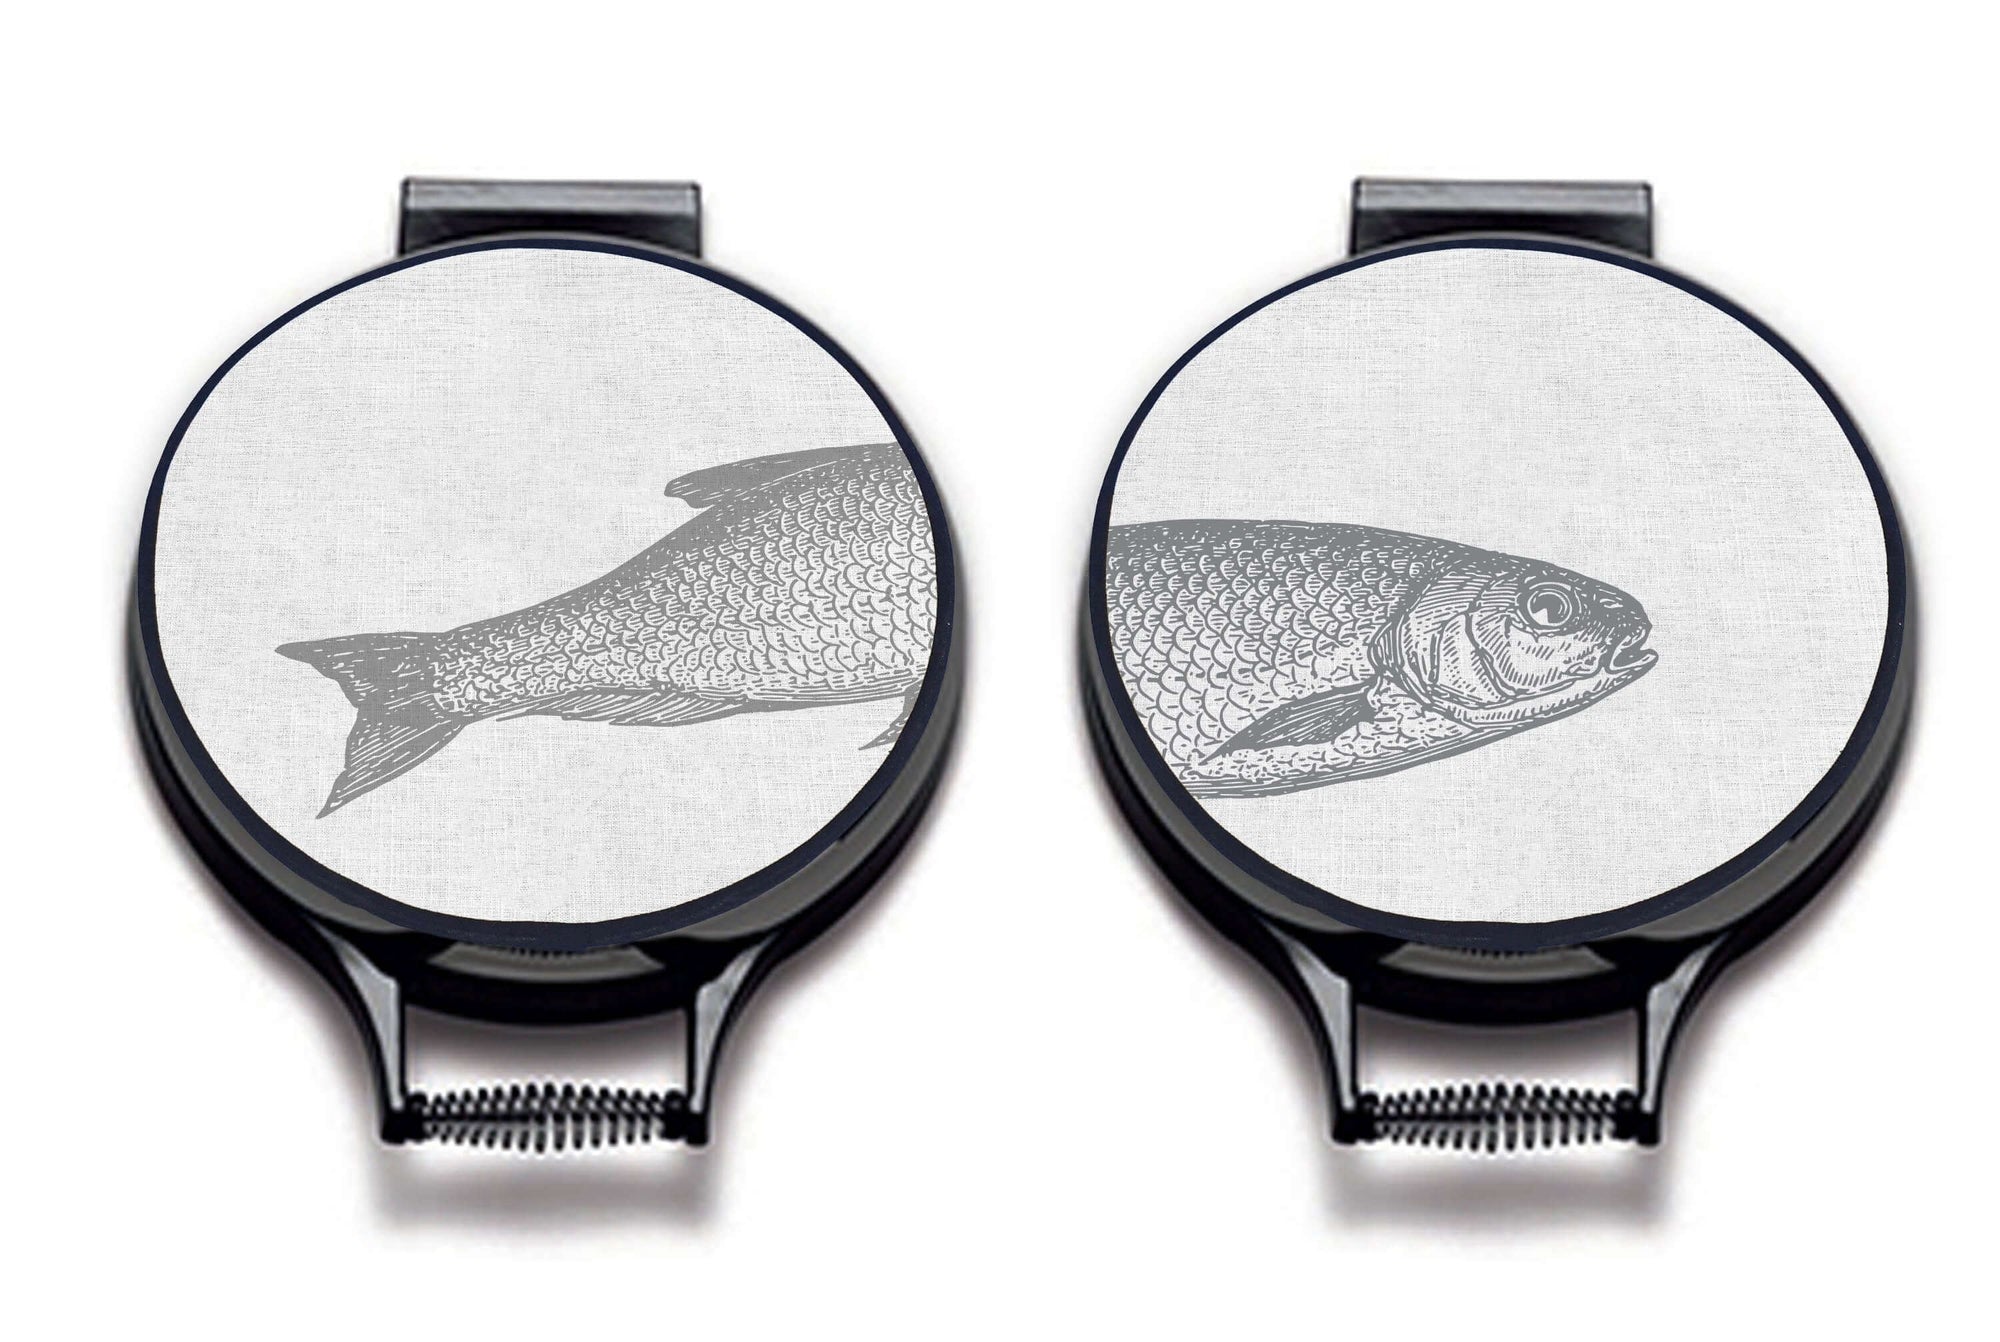 Set of two Ticklerton Hob Pads. Grey fish illustration print on a beige linen circular hob cover with black hemming. Fish head on one pad and fish tail of the other pad. Pictured on metal aga lid on an isolated background. Mustard and Gray